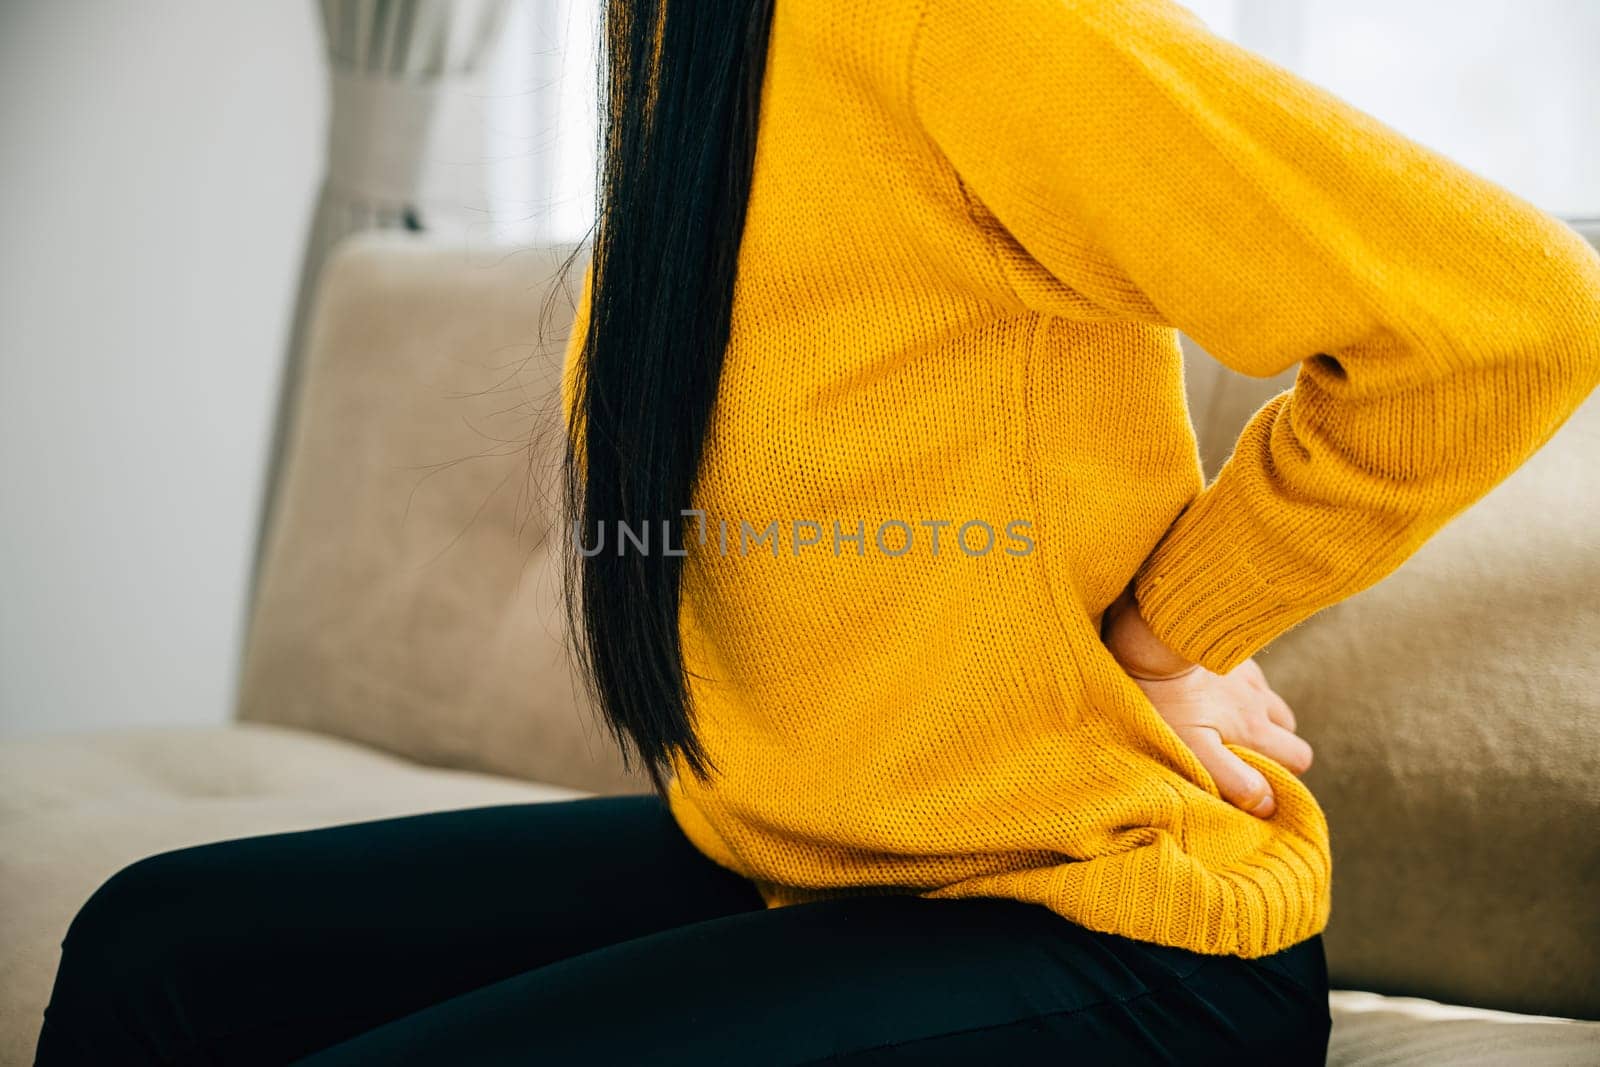 A woman from Asia holds her lower back in unbearable pain while seated on a sofa. Emphasizing chronic back pain discomfort and importance of medical care for back issues. health problem concept